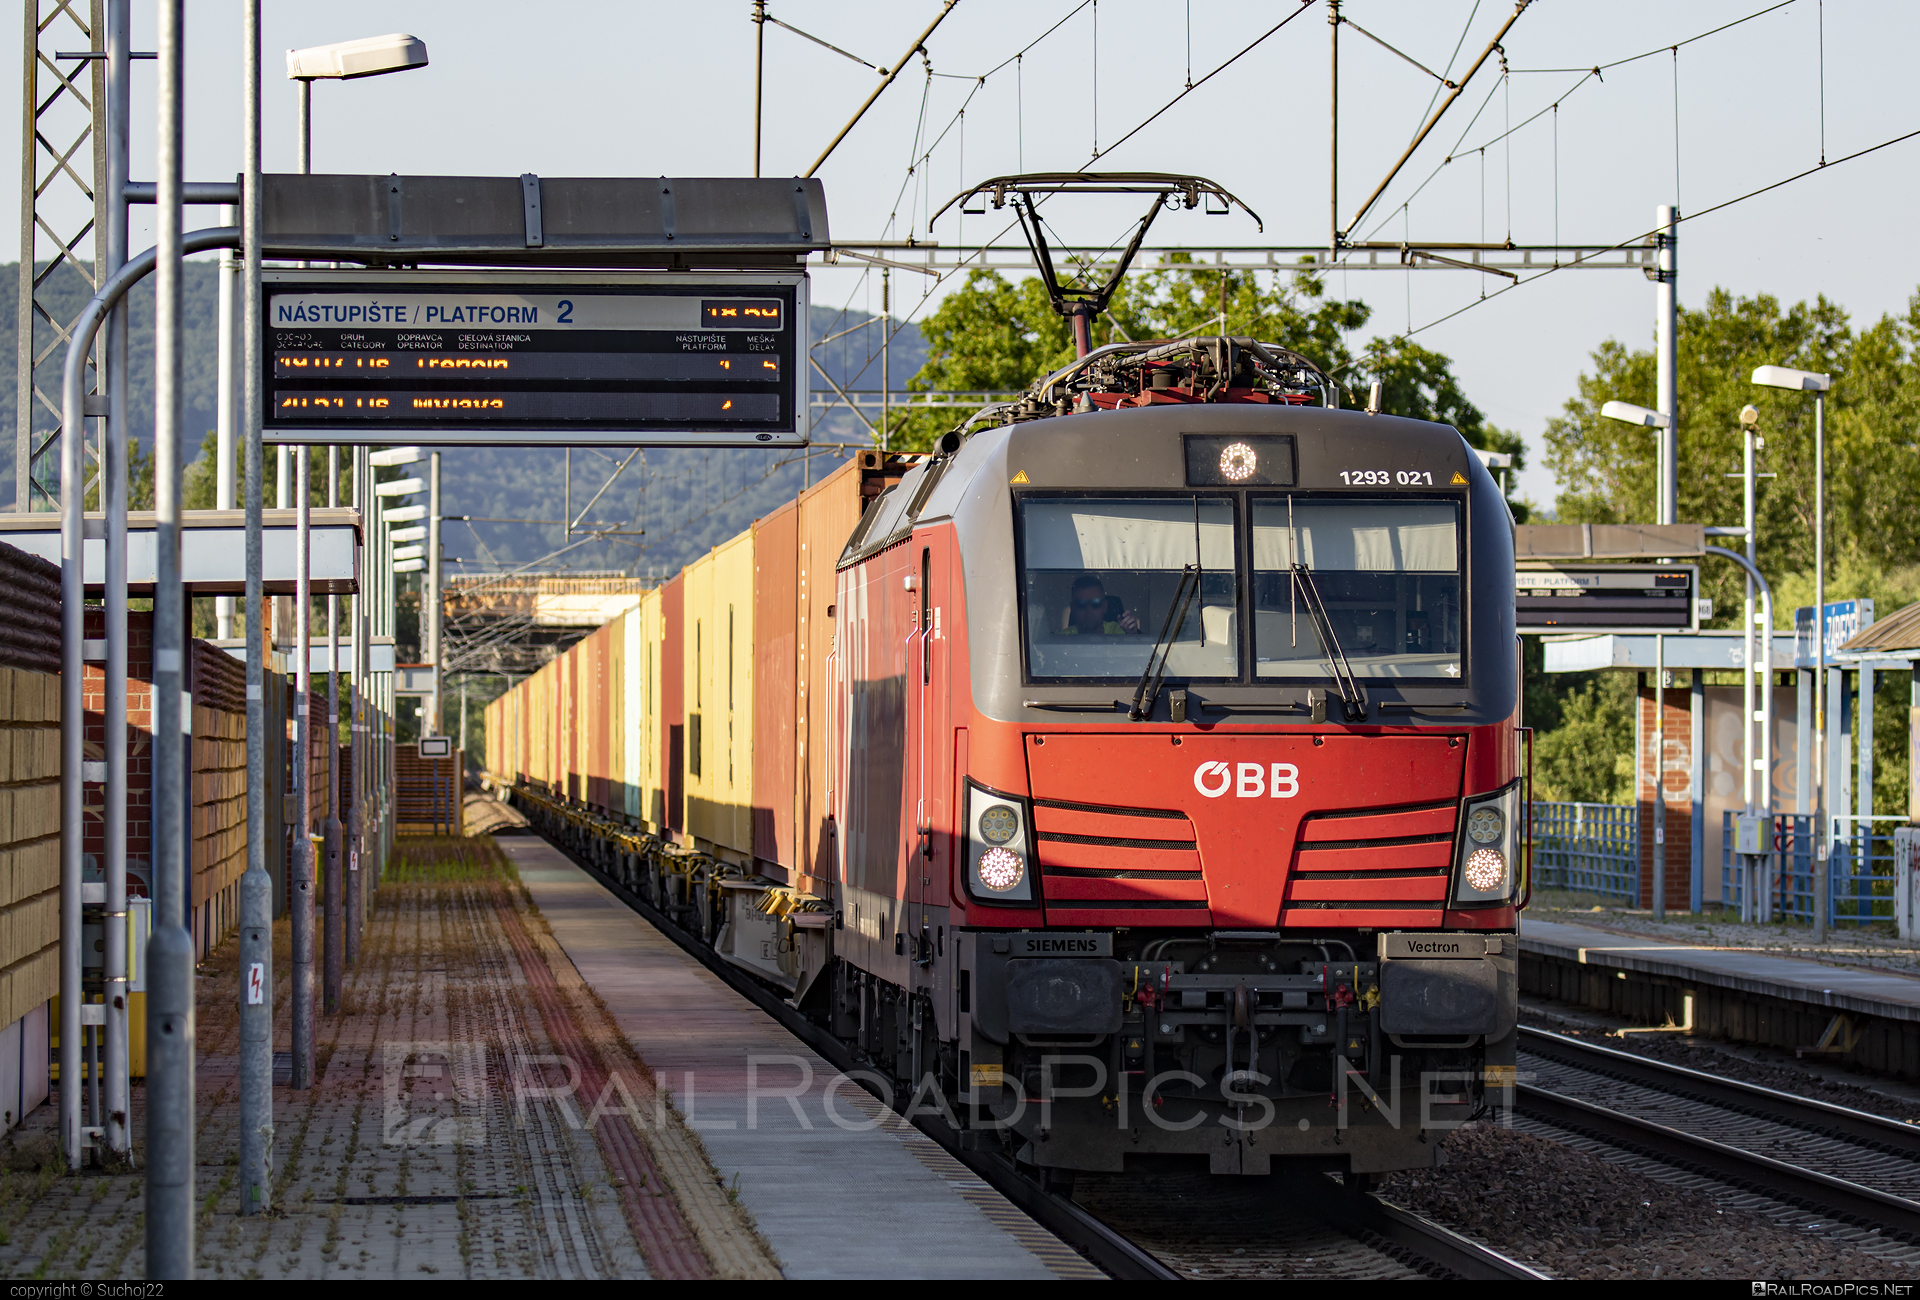 Siemens Vectron MS - 1293 021 operated by Rail Cargo Austria AG #container #flatwagon #obb #osterreichischebundesbahnen #rcw #siemens #siemensVectron #siemensVectronMS #vectron #vectronMS